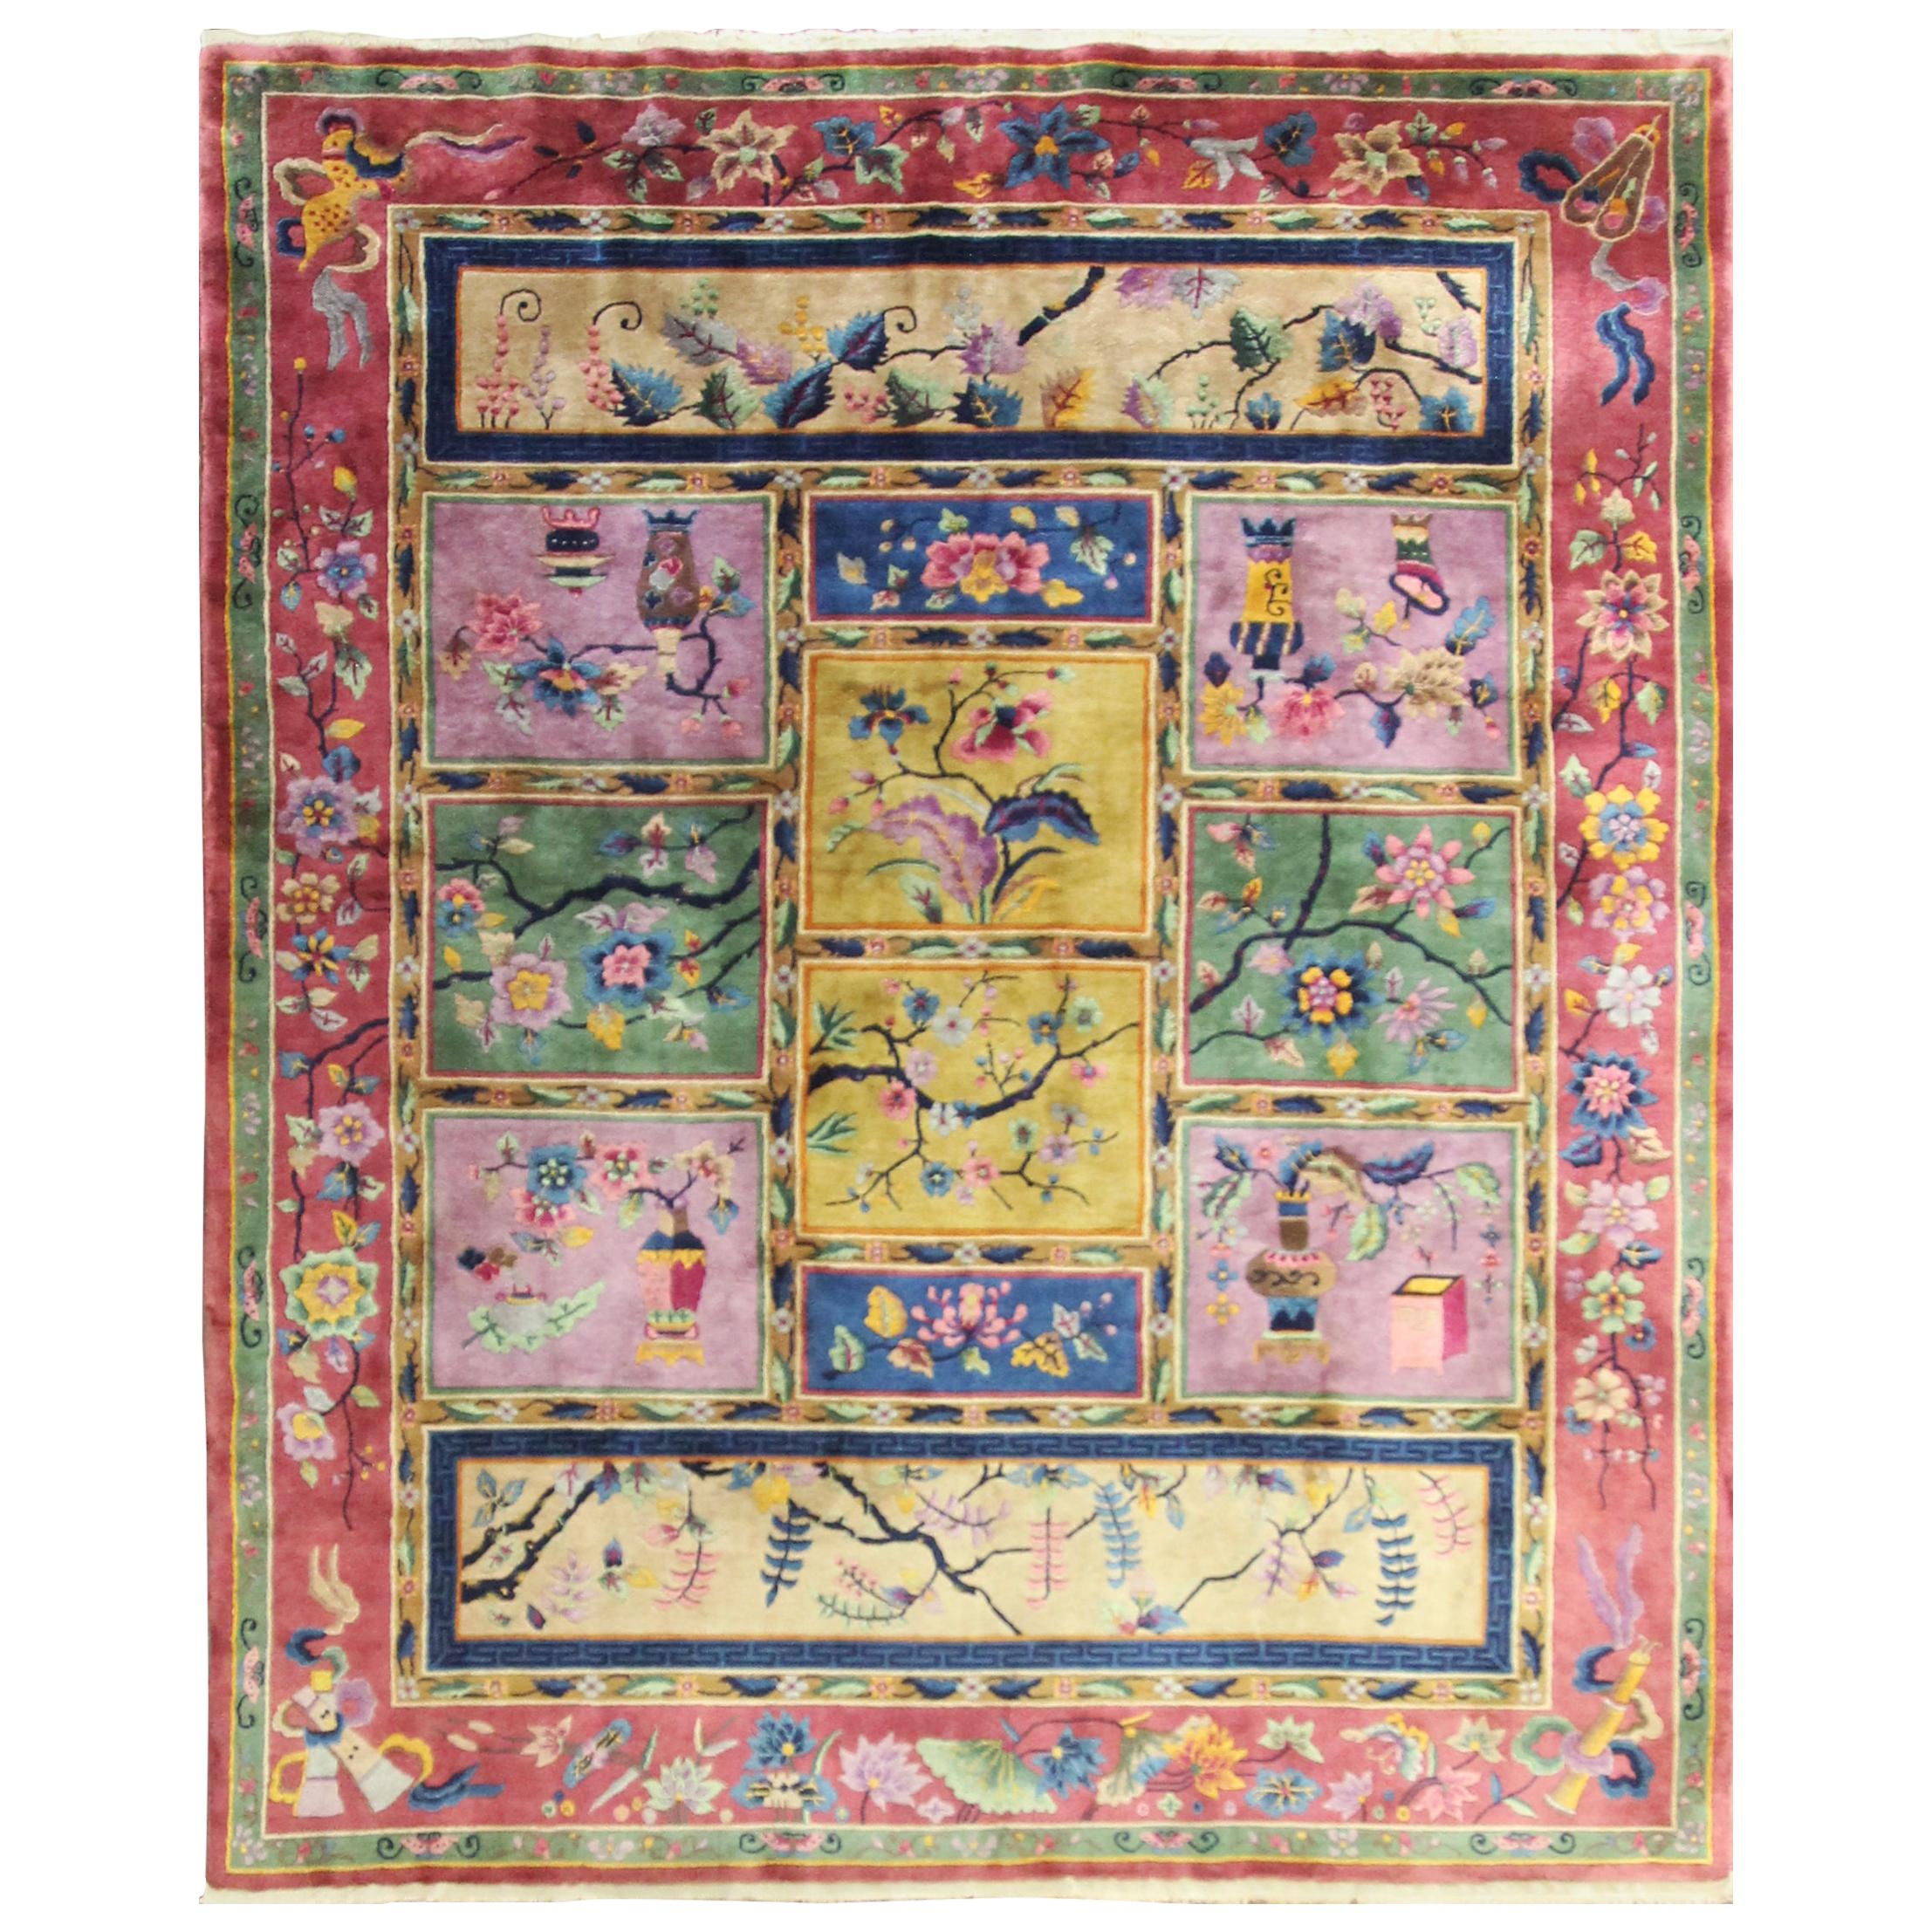 Antique Art Deco Chinese carpet, Most Unusual, 8' x 9'9" For Sale